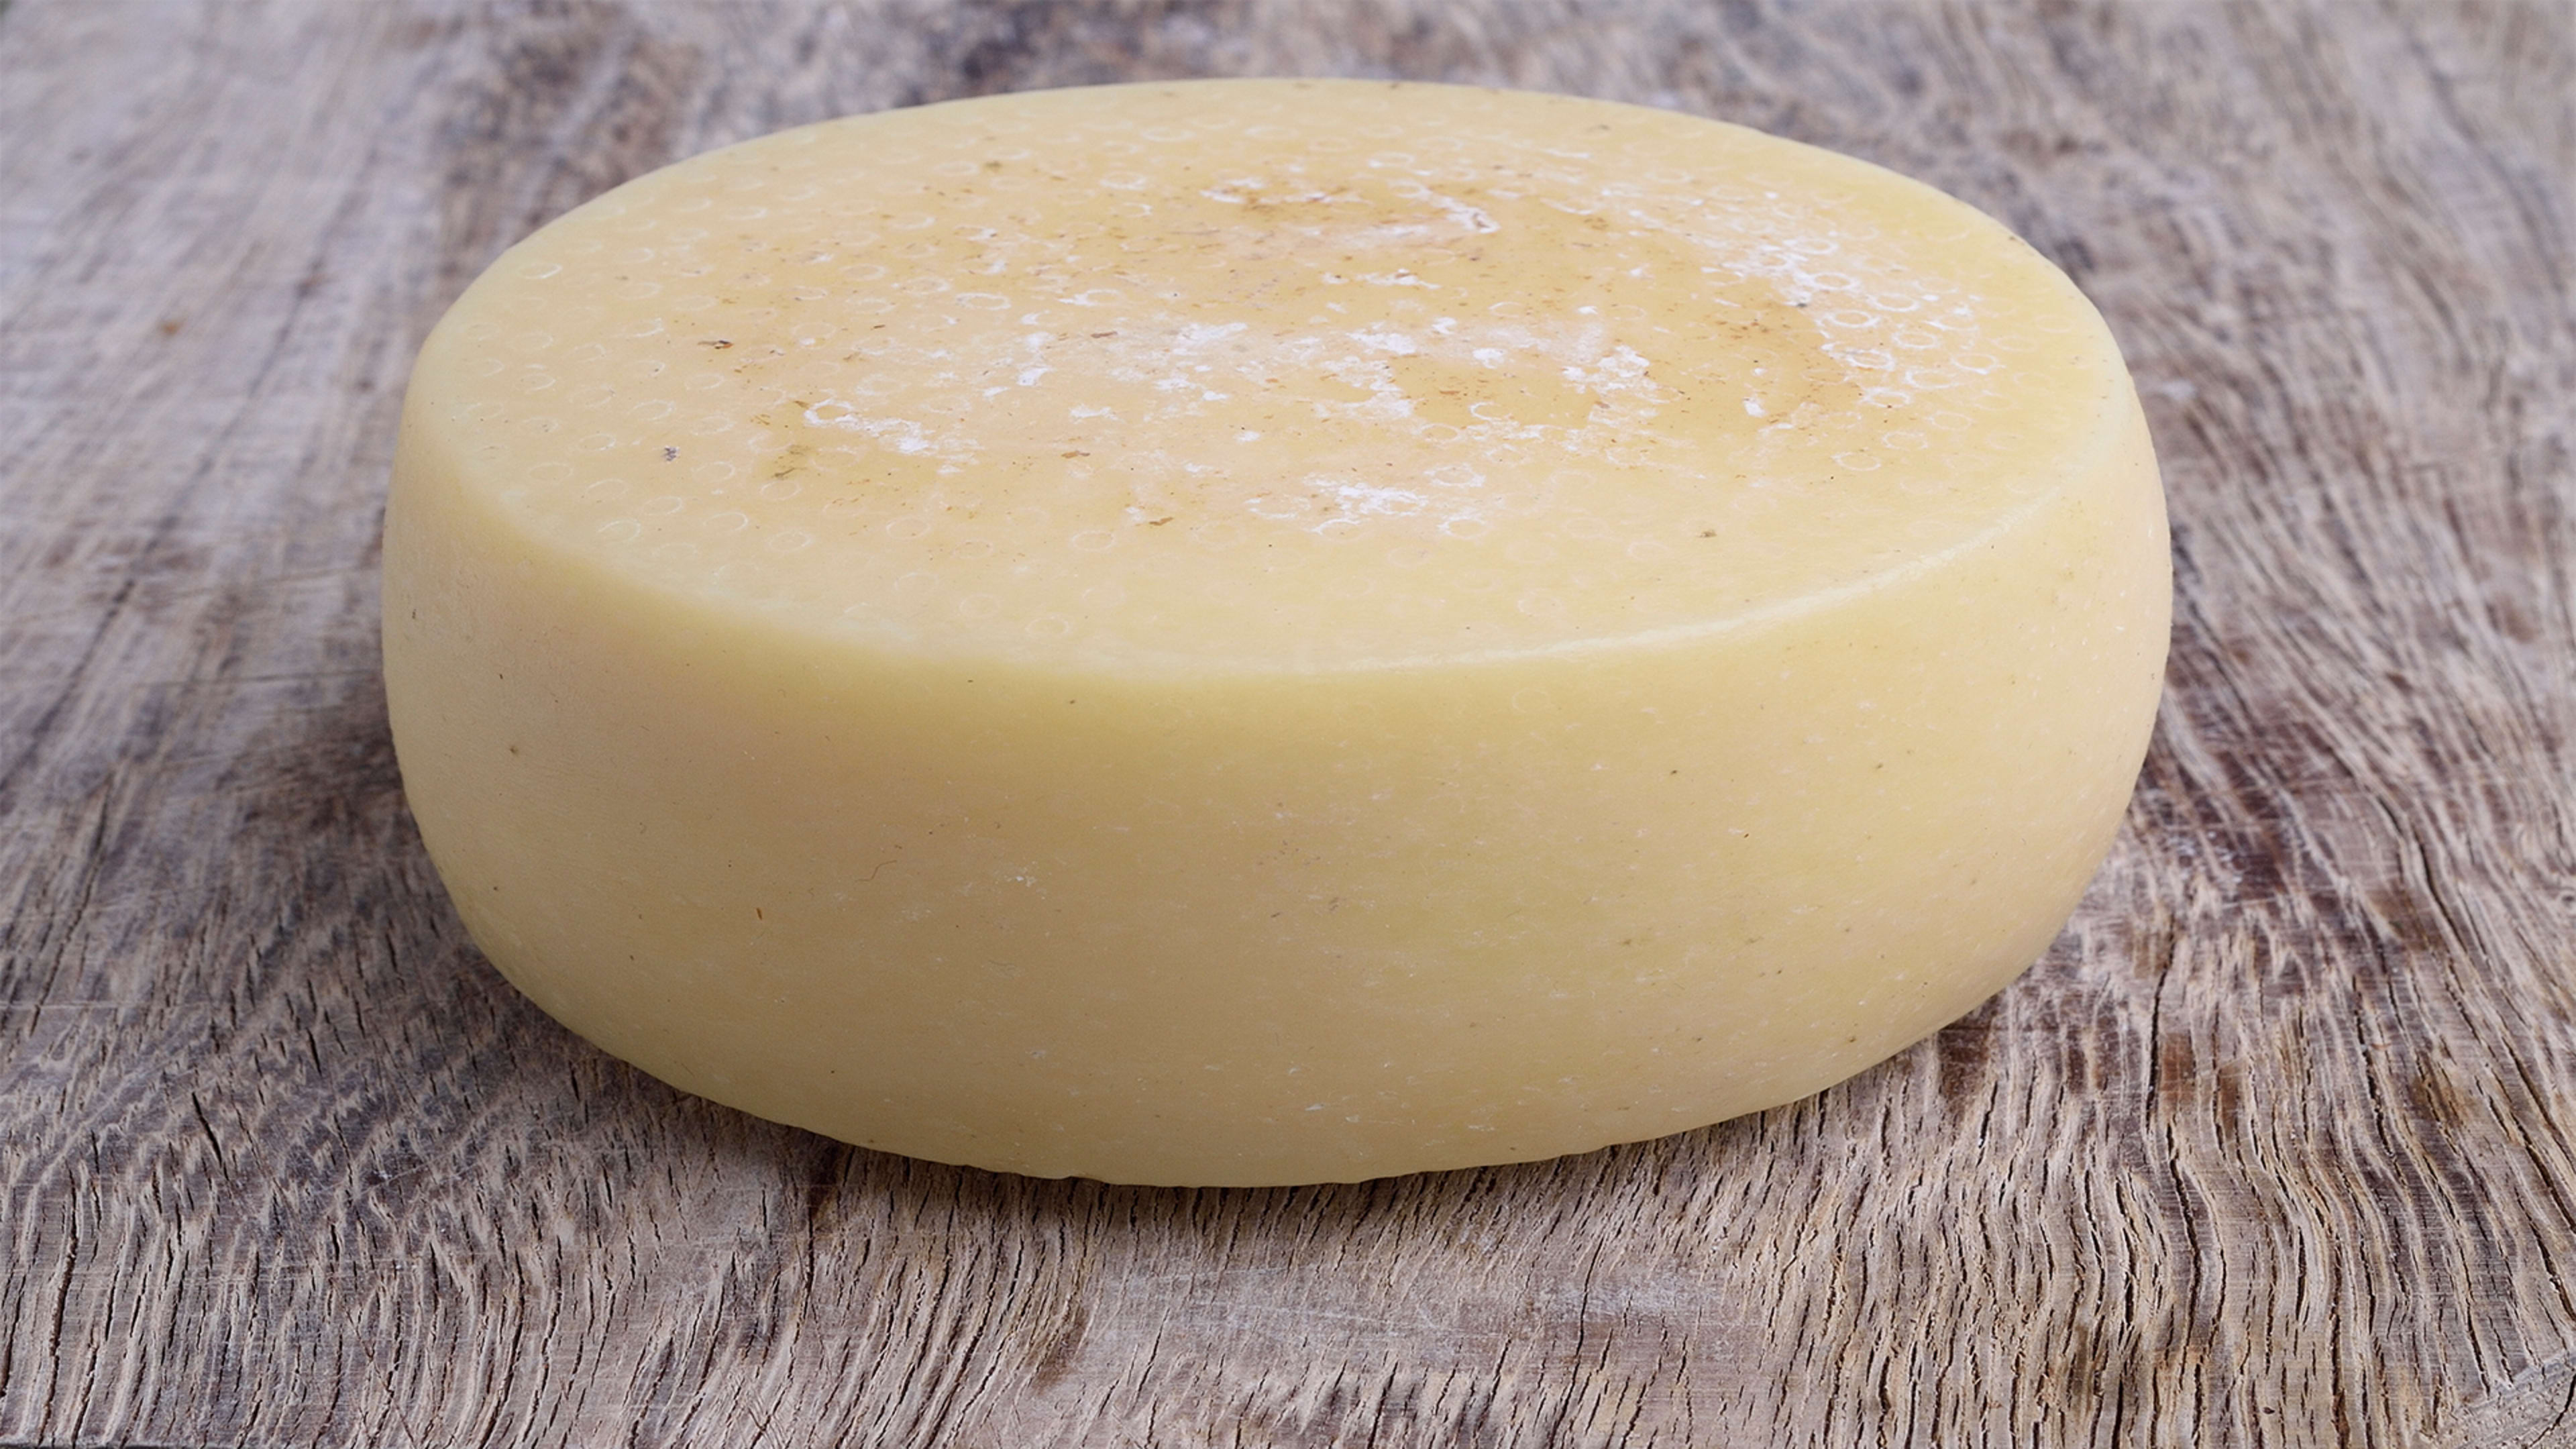 You Can Make Cheese Out Of Human Bacteria, Just In Case You Were Wondering